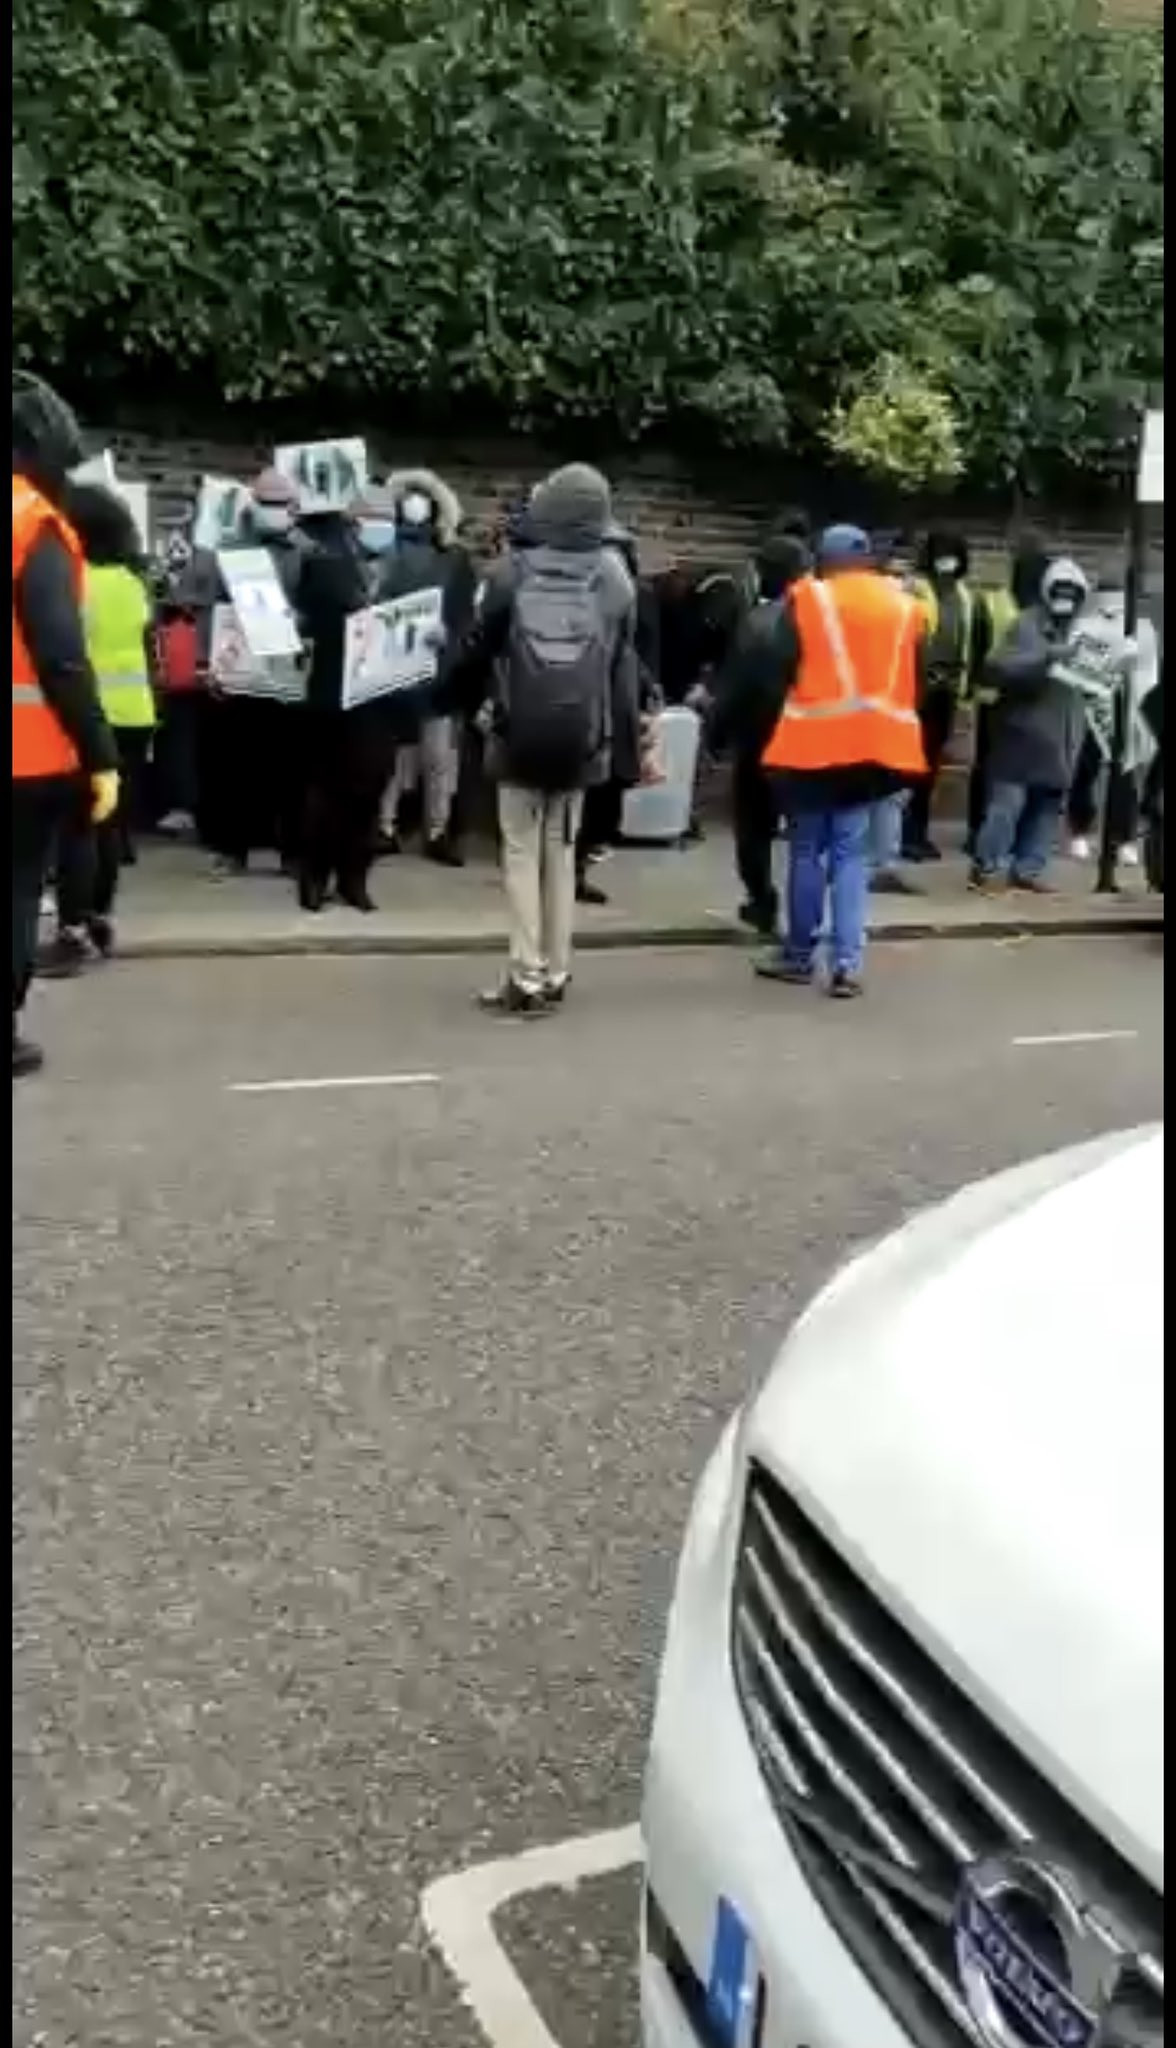 Pro-Buhari protesters leave Abuja House in London after being booed by Anti-Buhari protesters (video)